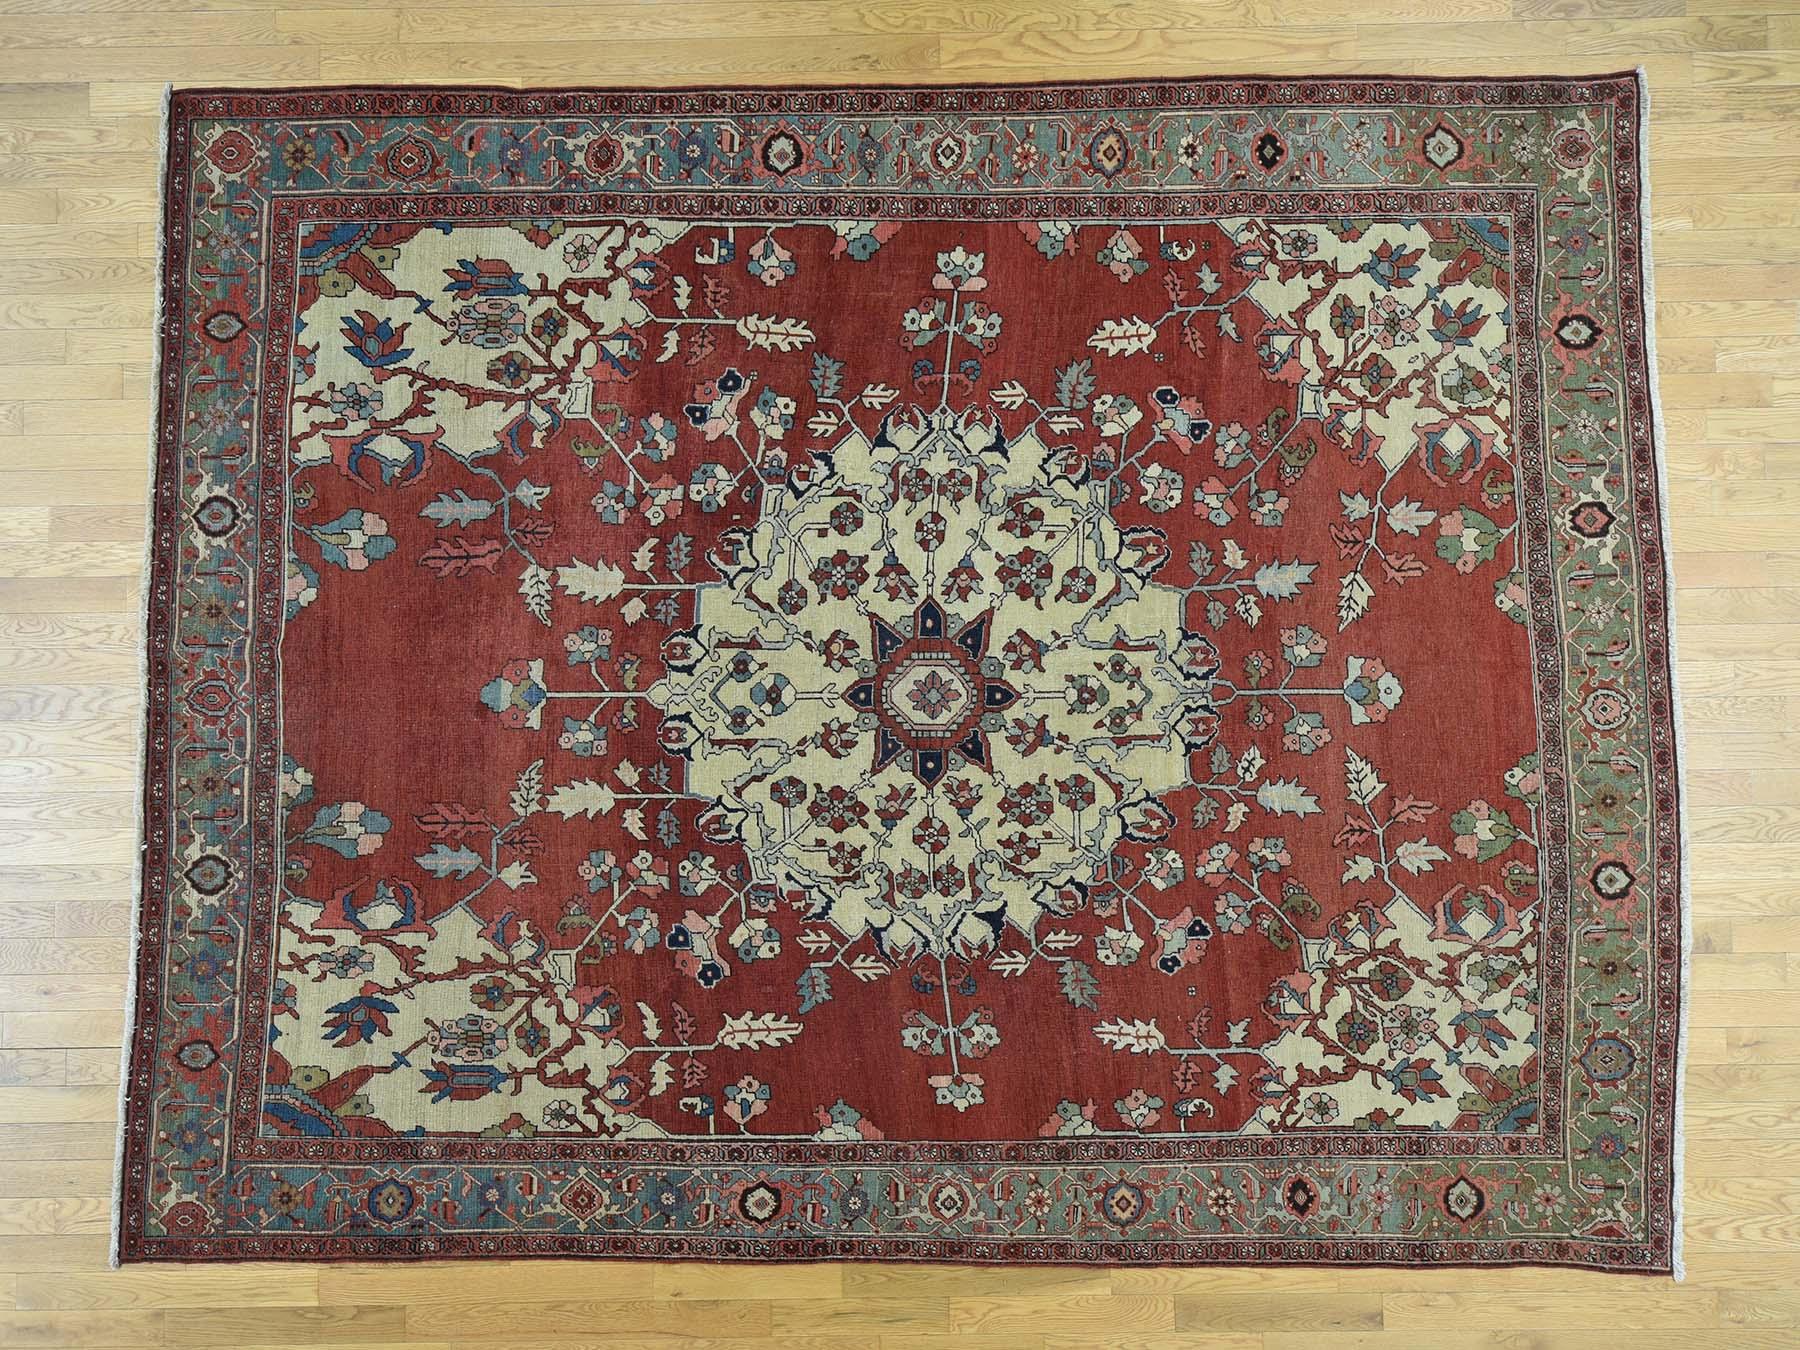 This is a genuine hand knotted oriental rug. It is not hand tufted or machine made rug. Our entire inventory is made of either hand knotted or handwoven rugs.

Start a new room with this superb hand knotted carpet. This handcrafted antique Persian